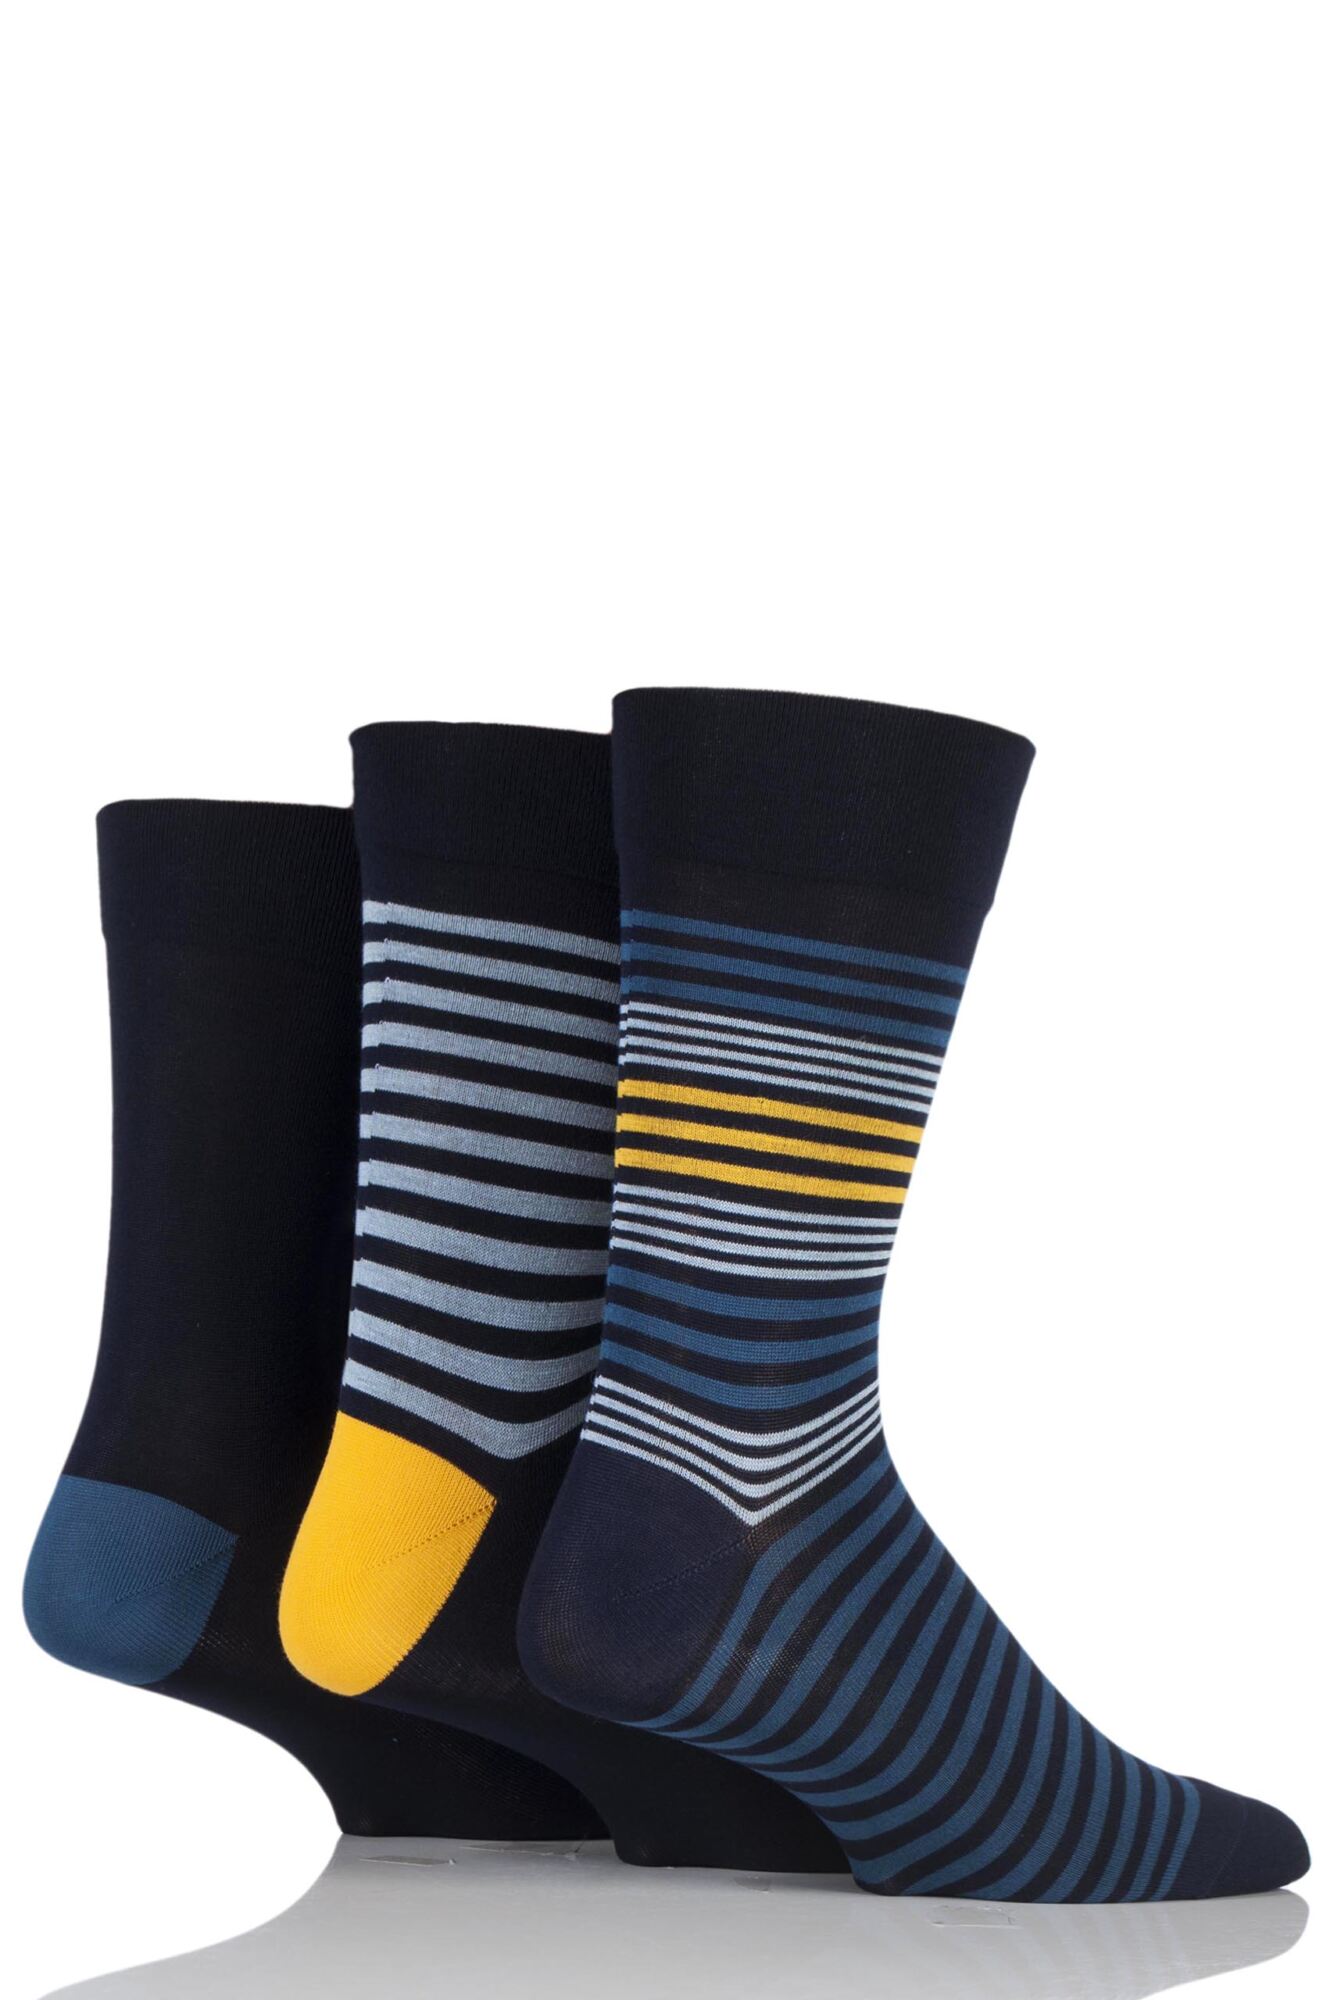 3 Pair Comfort Cuff Gentle Bamboo Striped and Plain Socks with Smooth Toe Seams Men's - SOCKSHOP